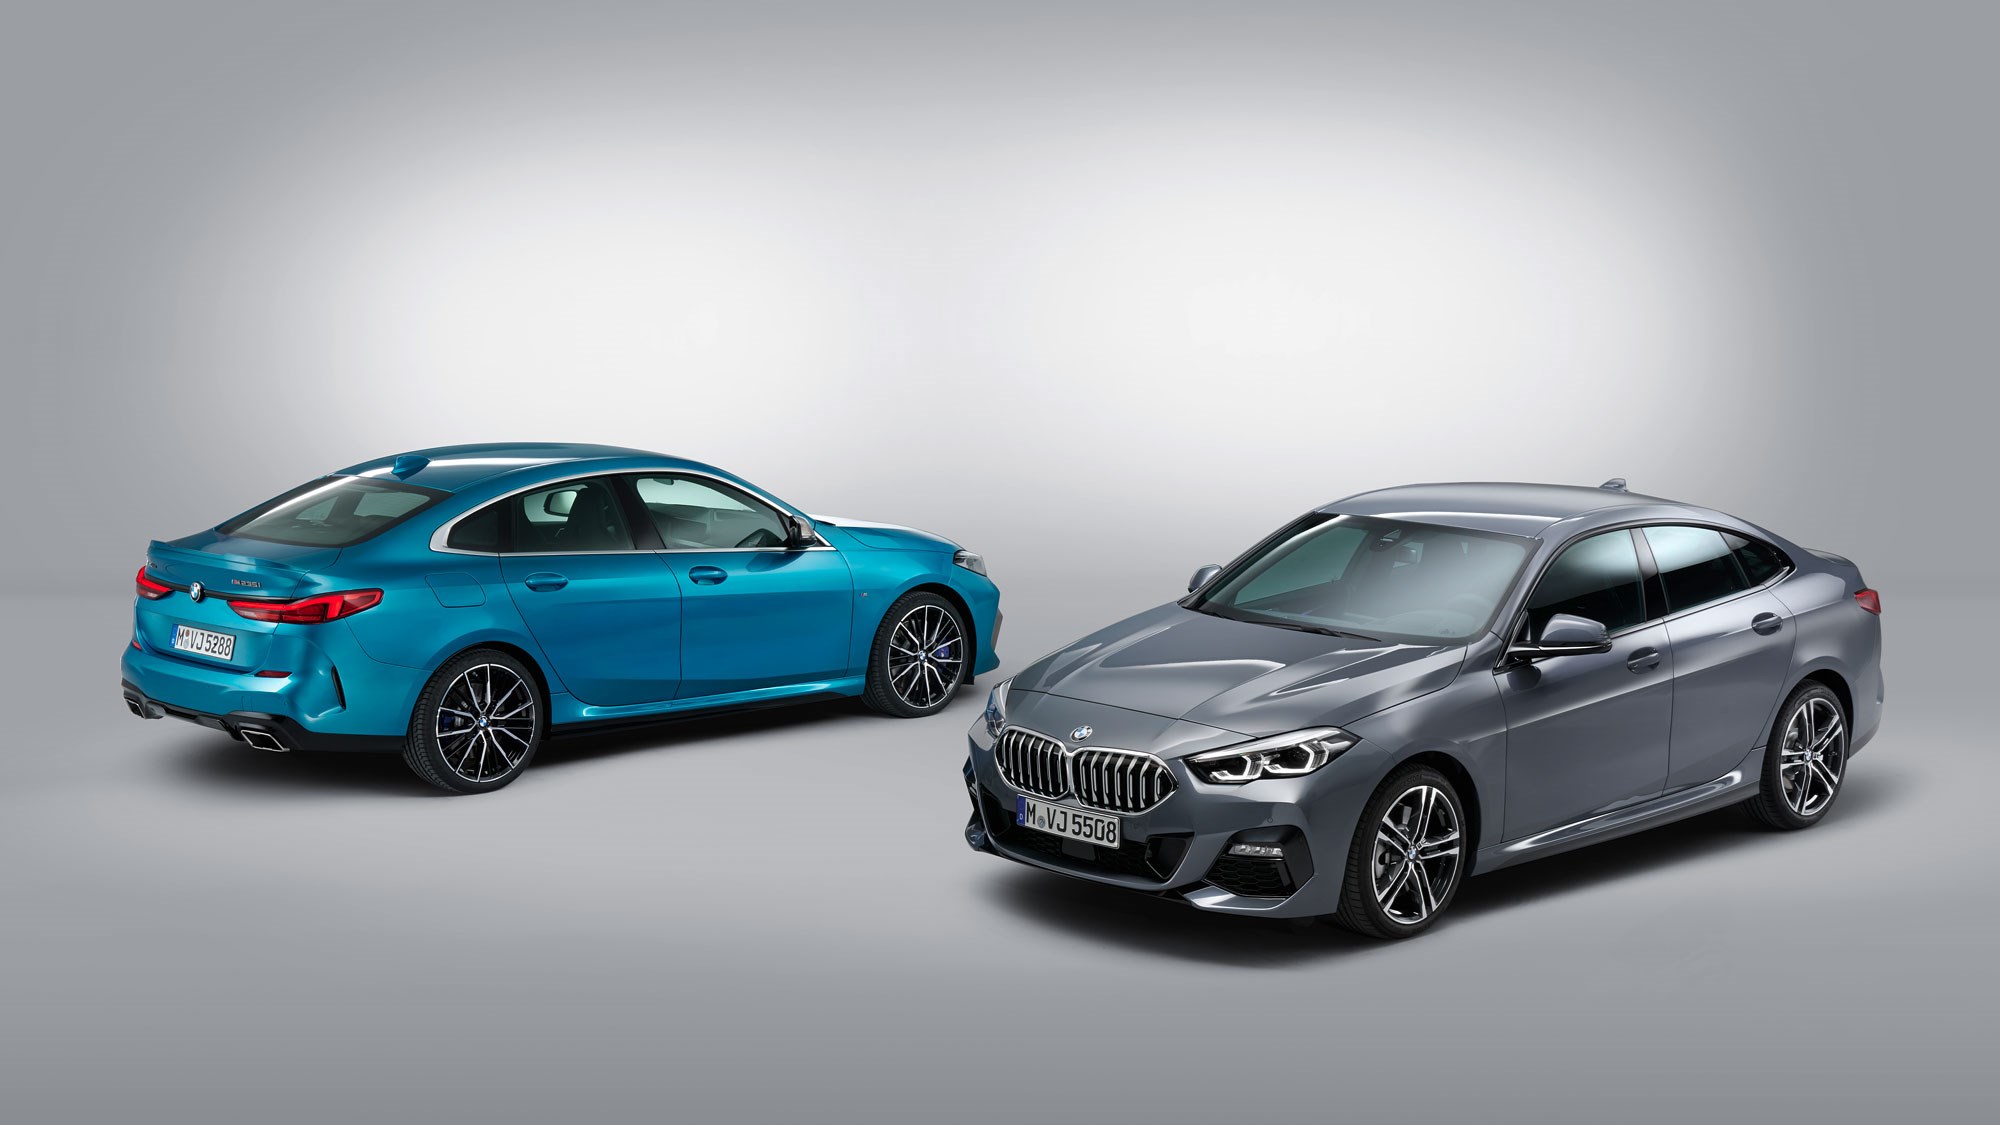 New BMW 2-series Coupe: straight-six and rear-wheel drive!